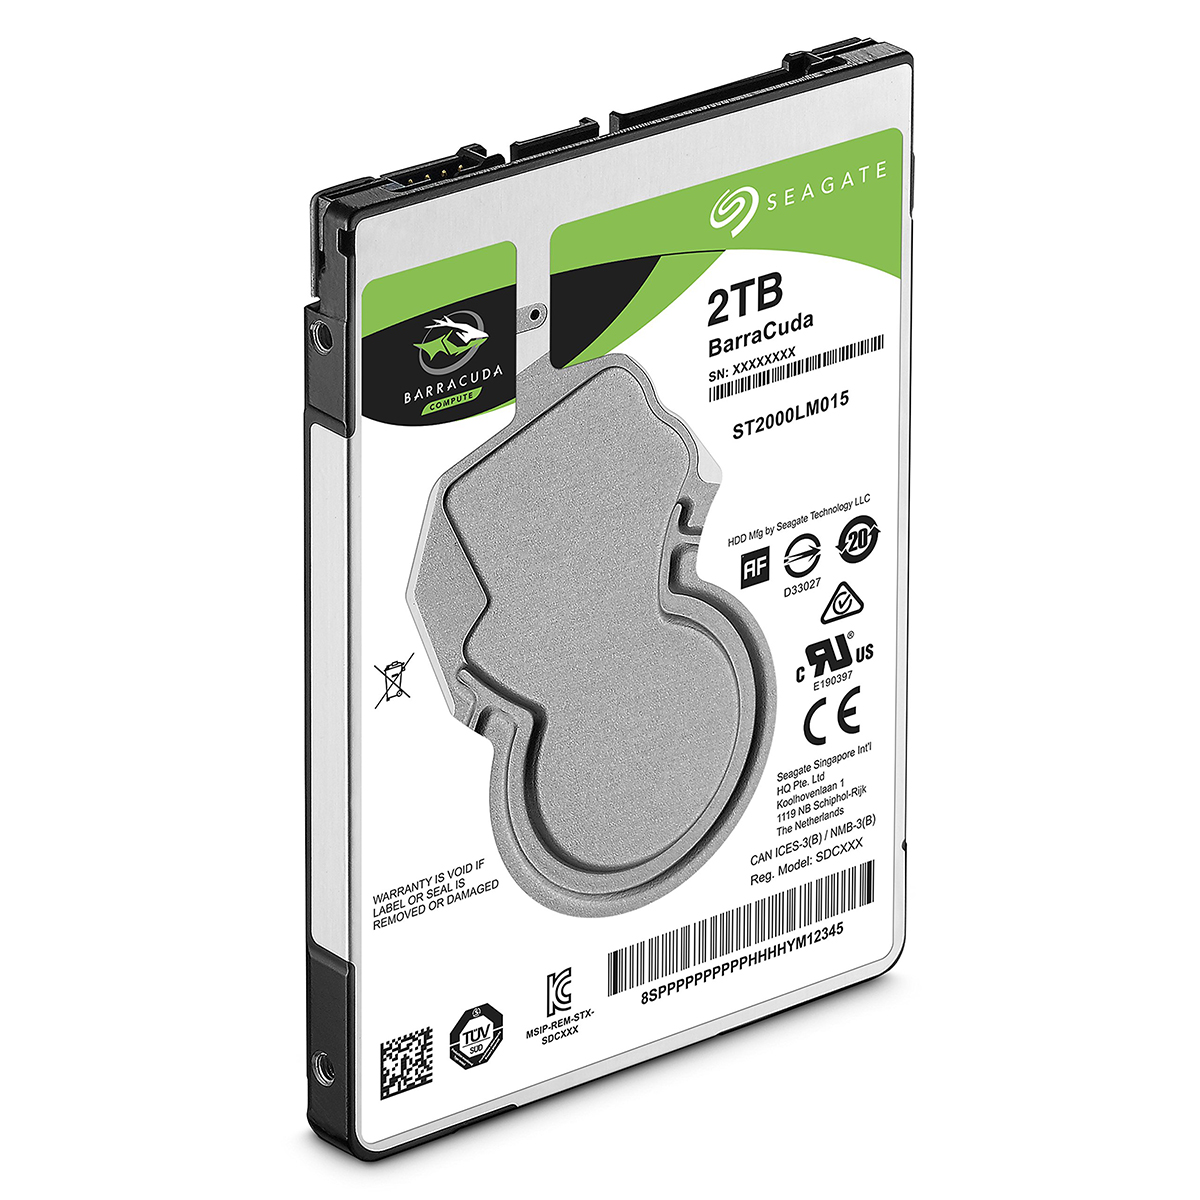 Ổ cứng HDD Laptop 2TB Seagate Barracuda 128MB Cache - Tuanphong.vn